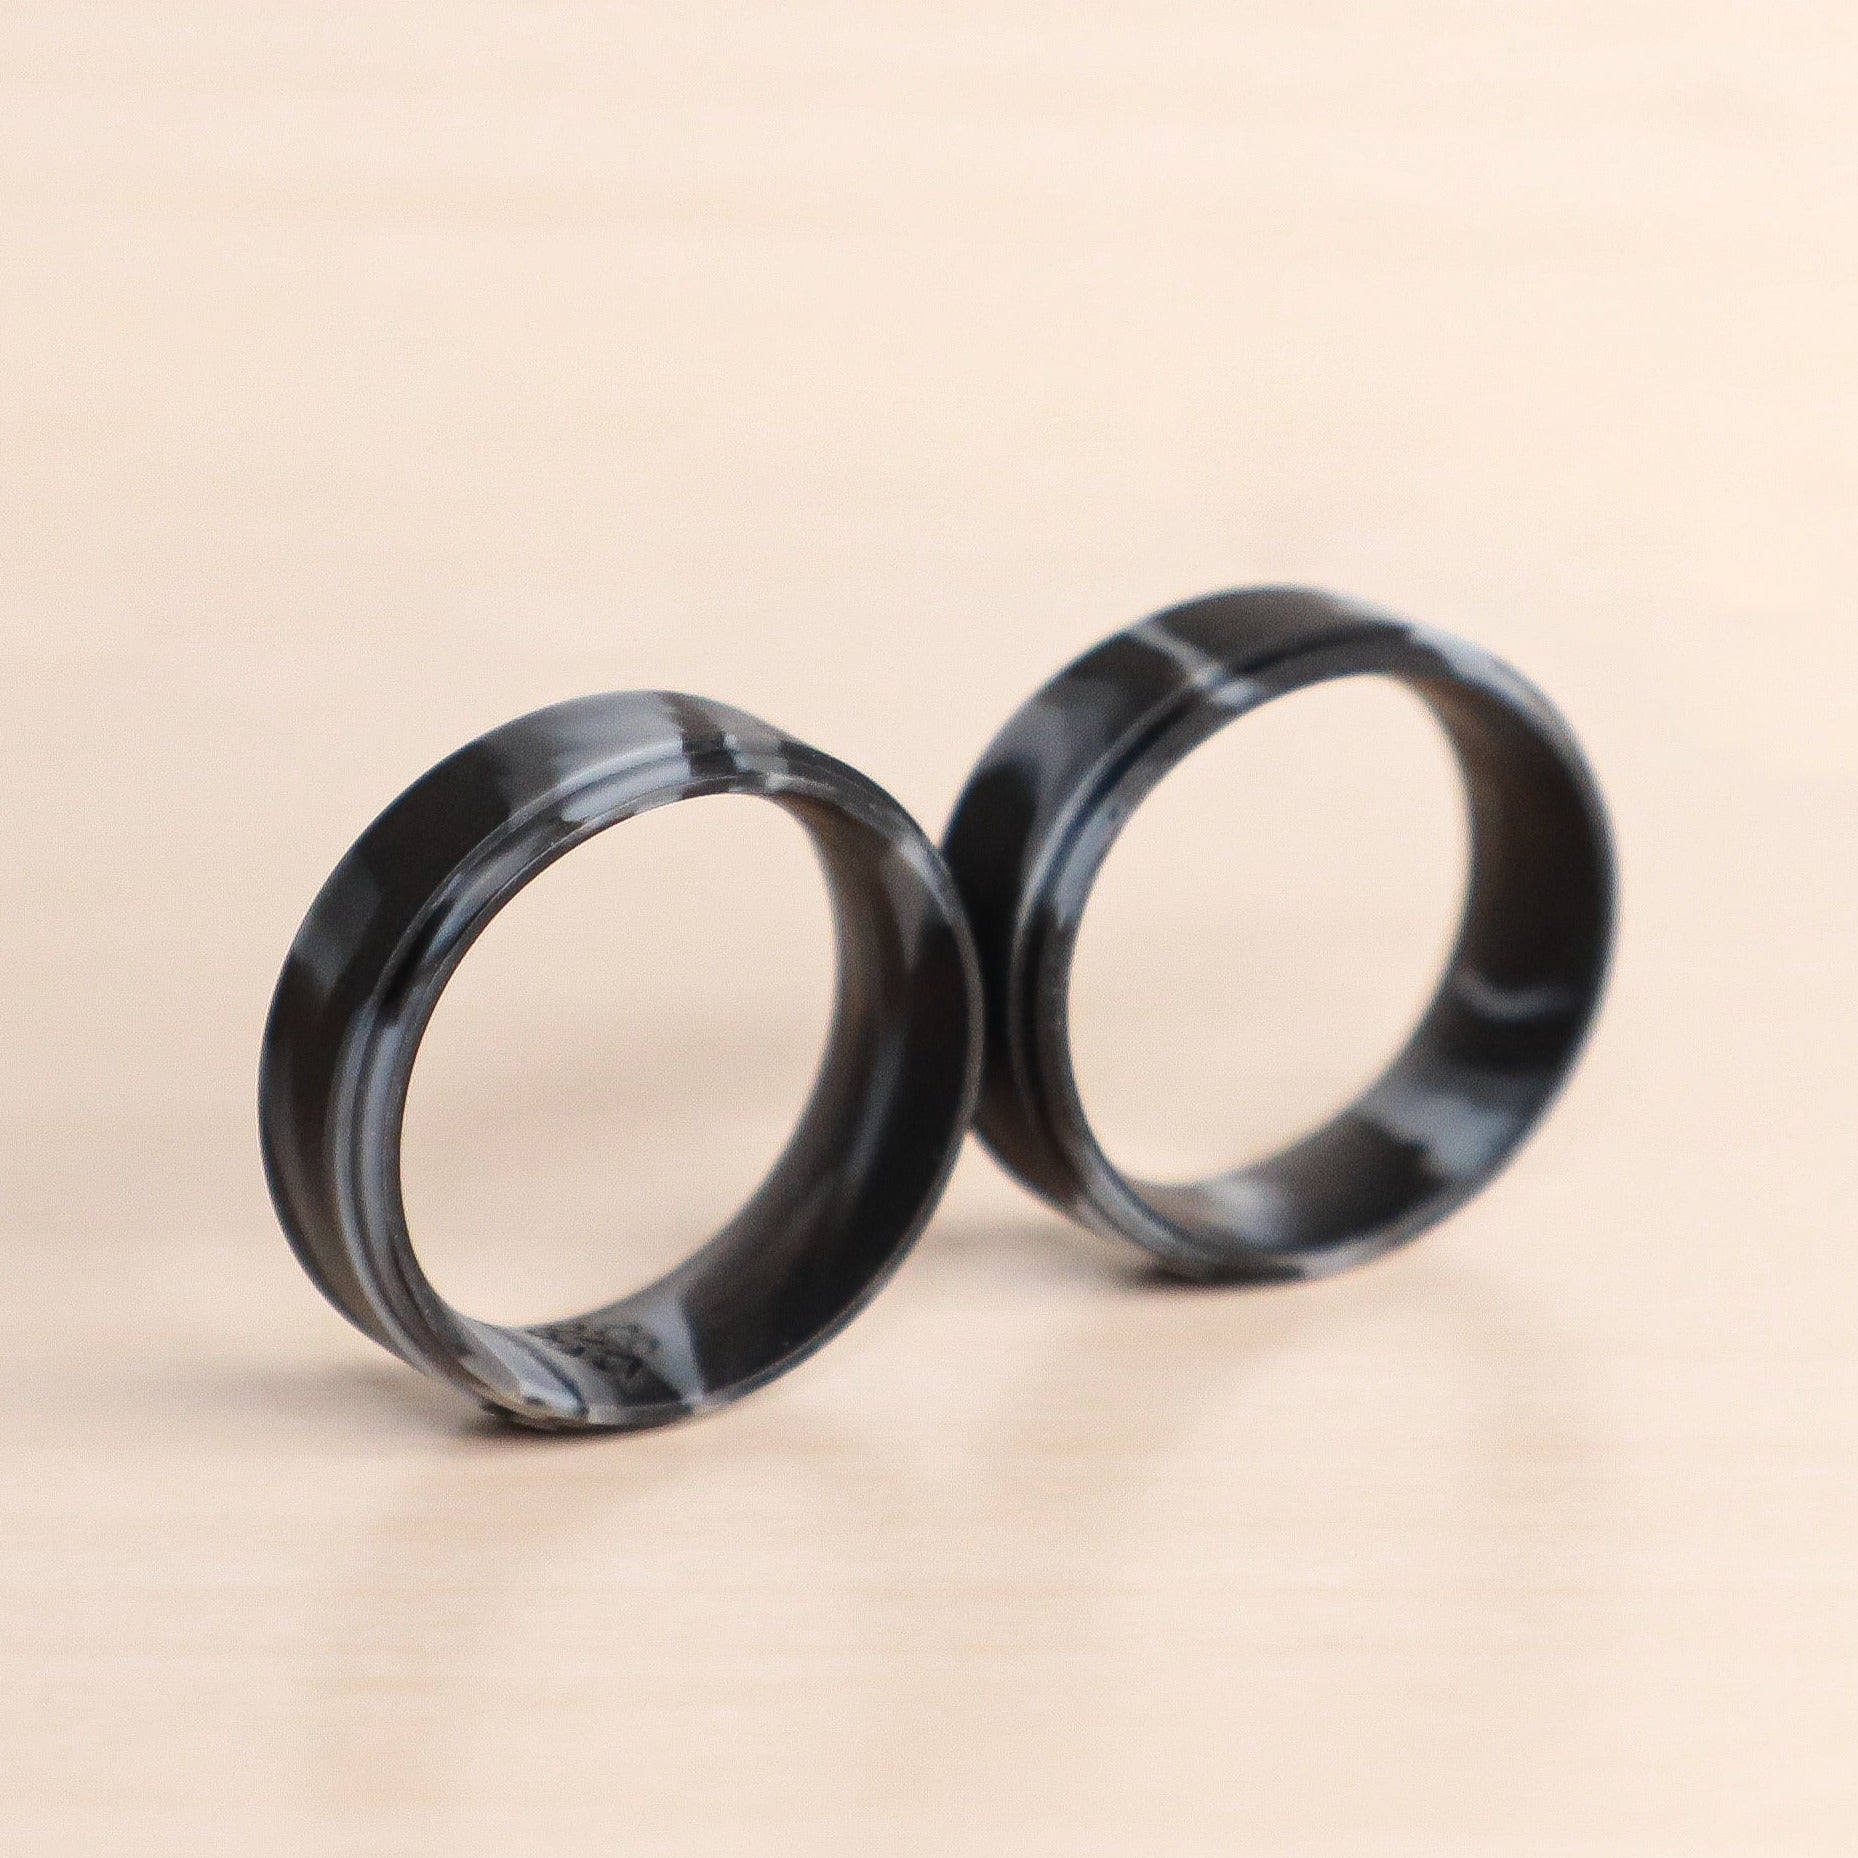 Black Marble Step Edge Breathable Silicone Ring for Men